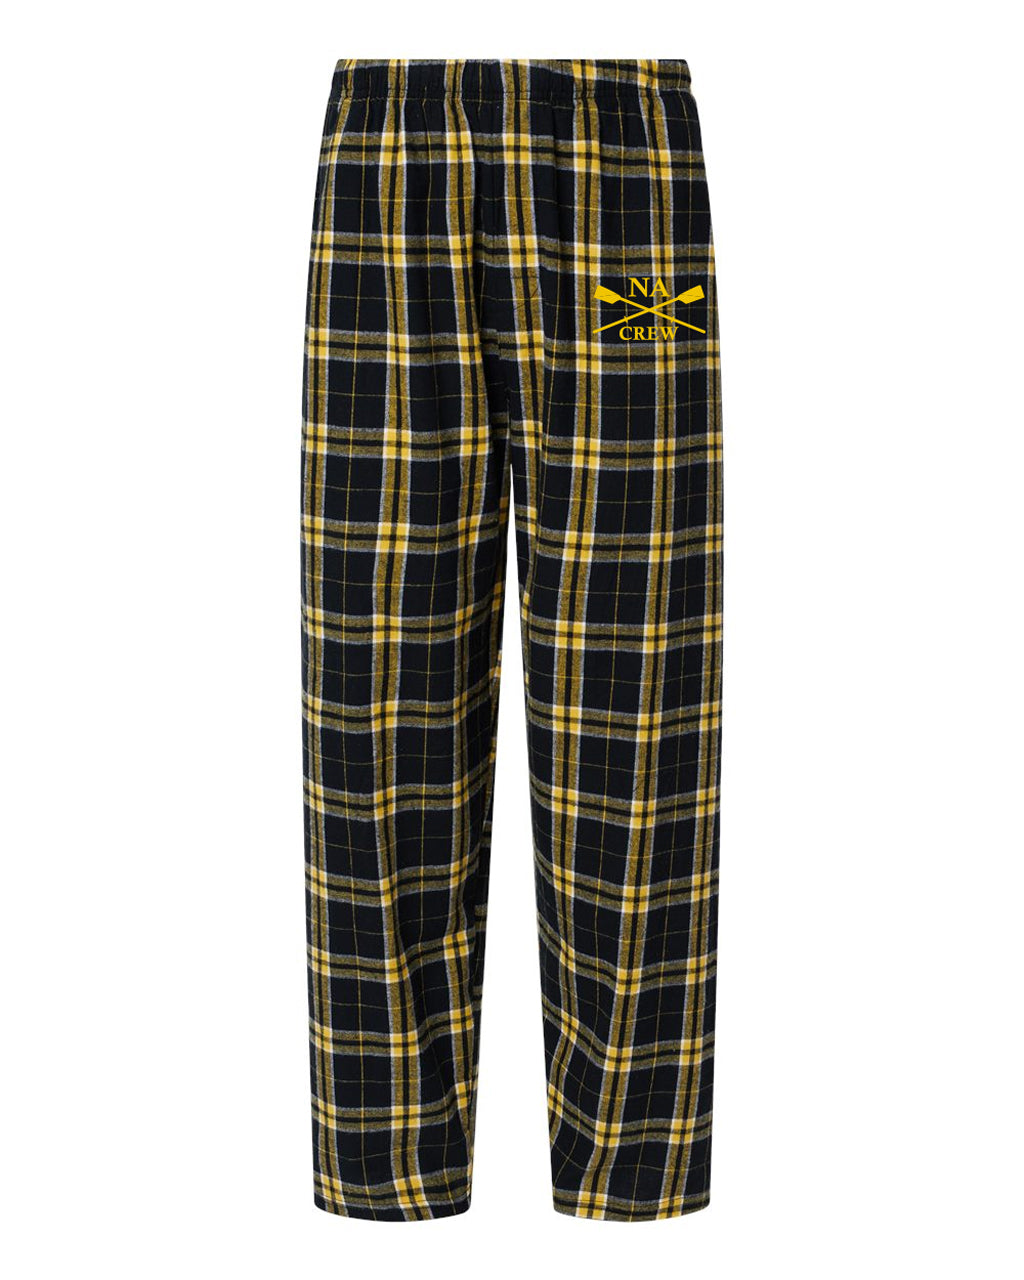 North Allegheny Flannel Pants